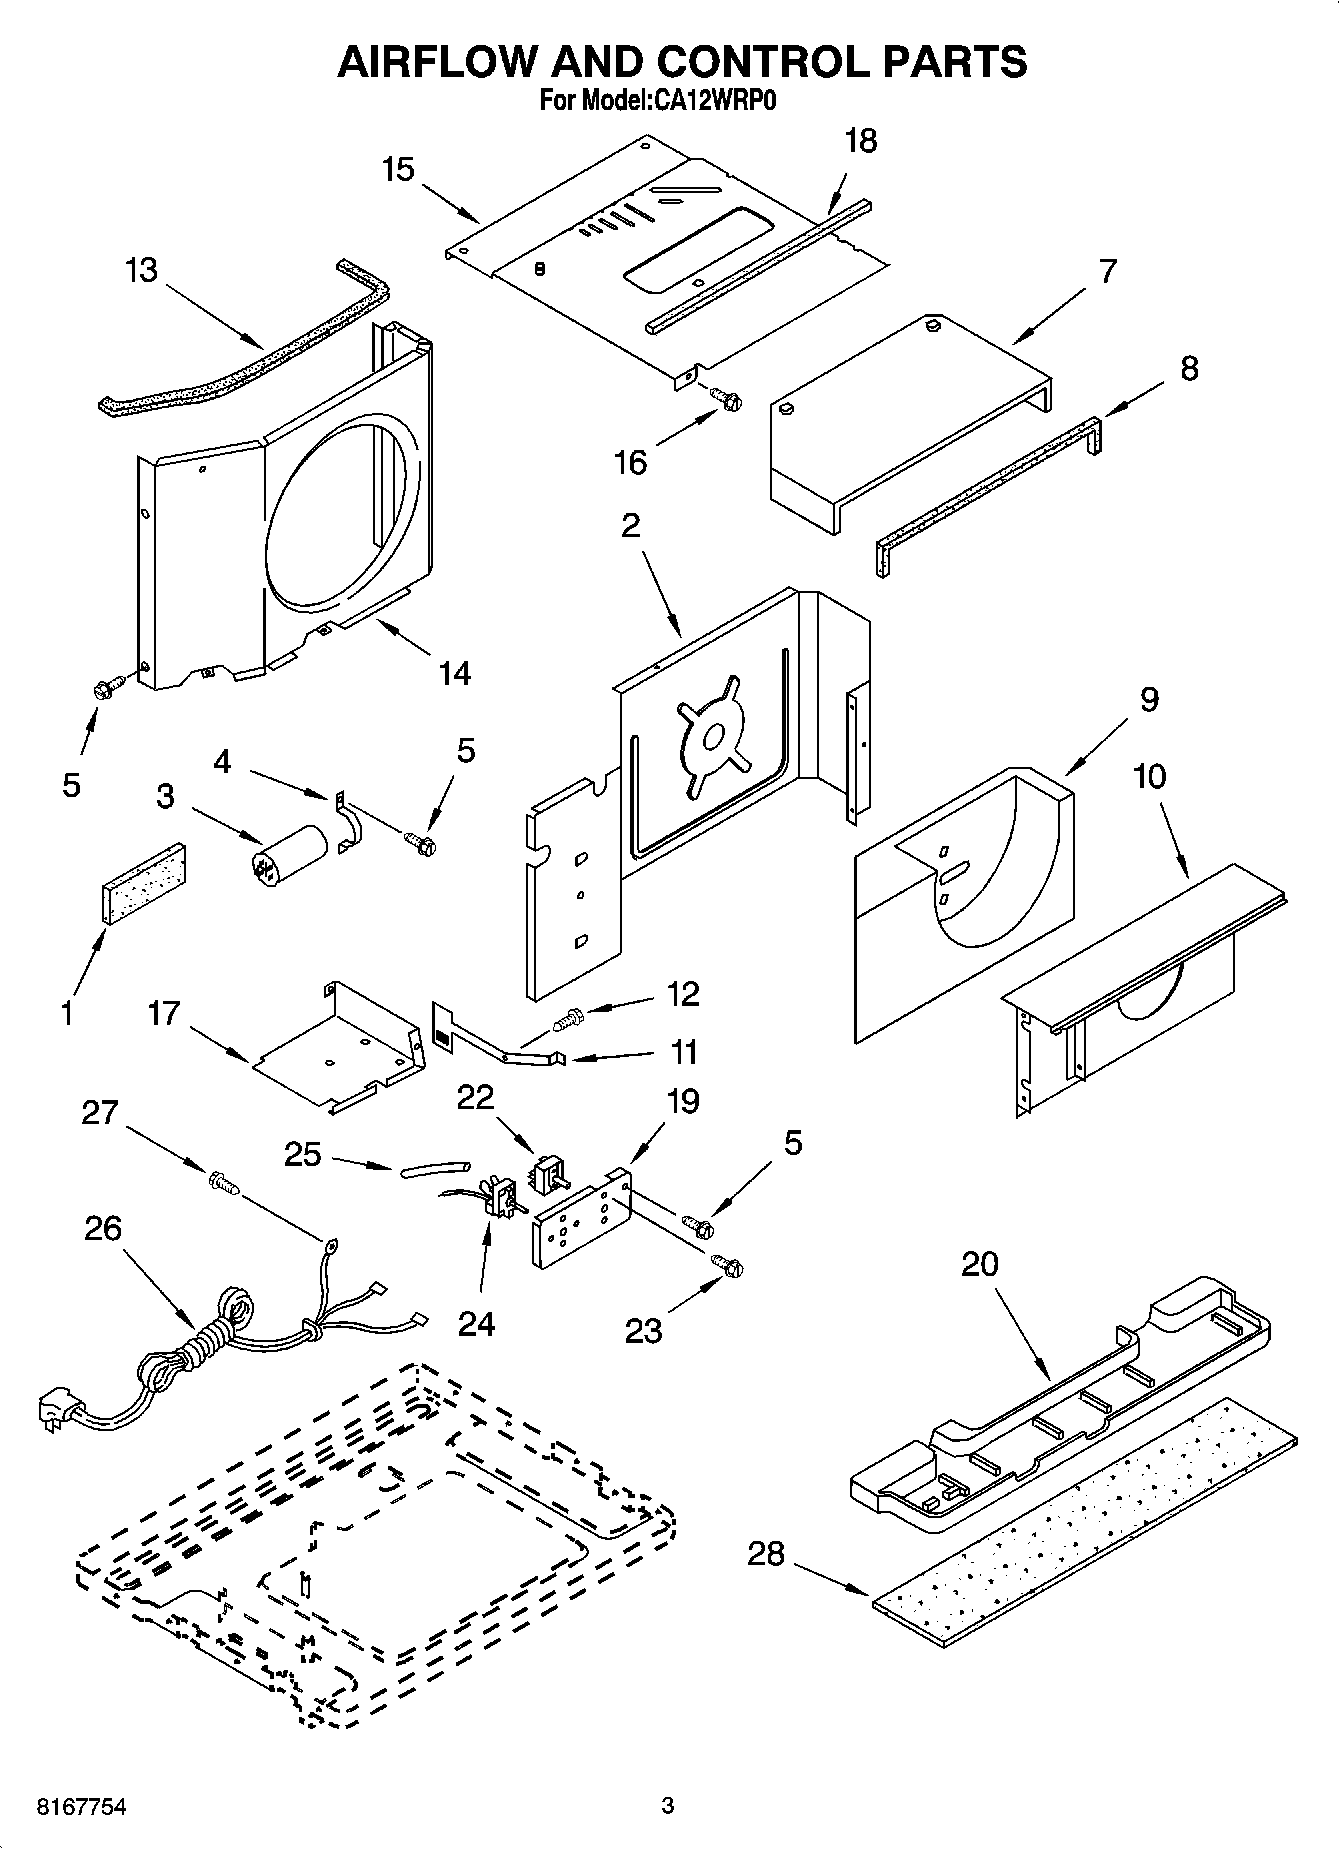 02 - AIR FLOW AND CONTROL PARTS